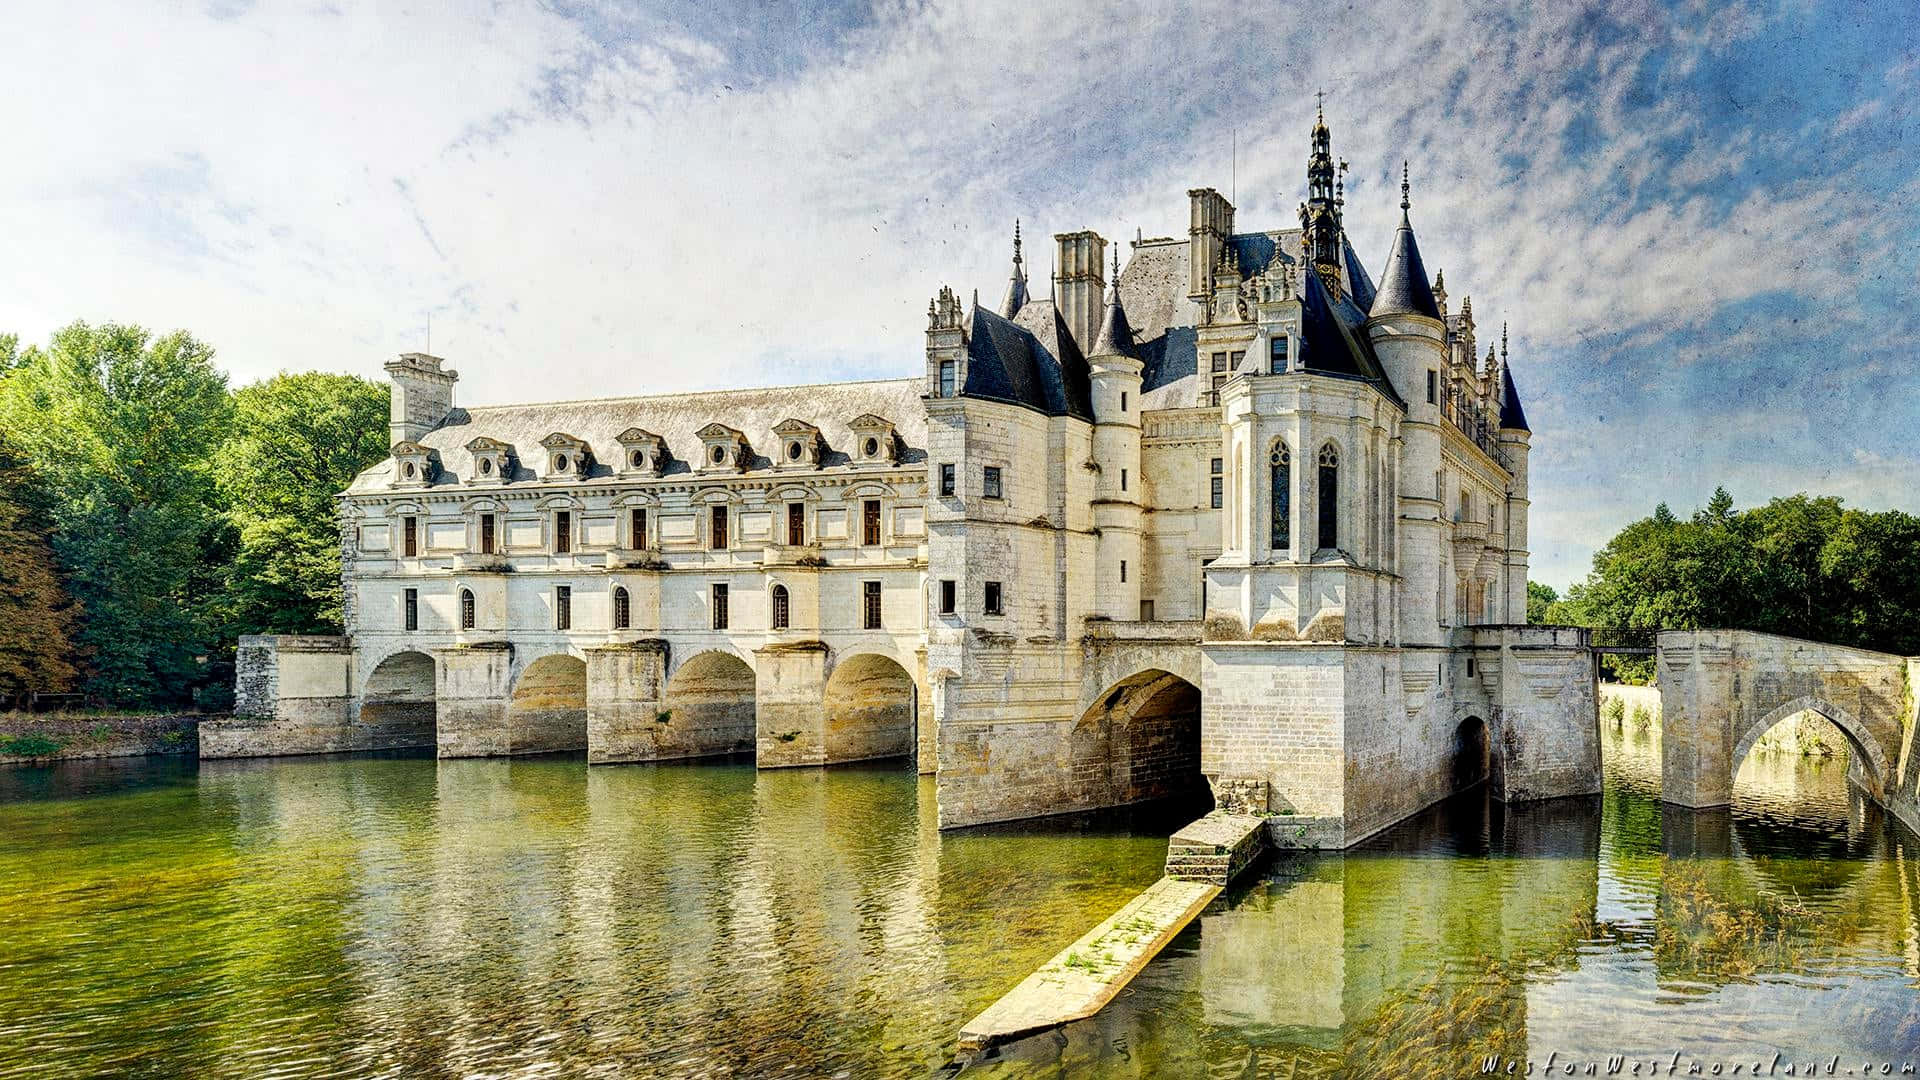 Caption: "Scenic View of Majestic Chenonceau Castle Over Mossy Water" Wallpaper